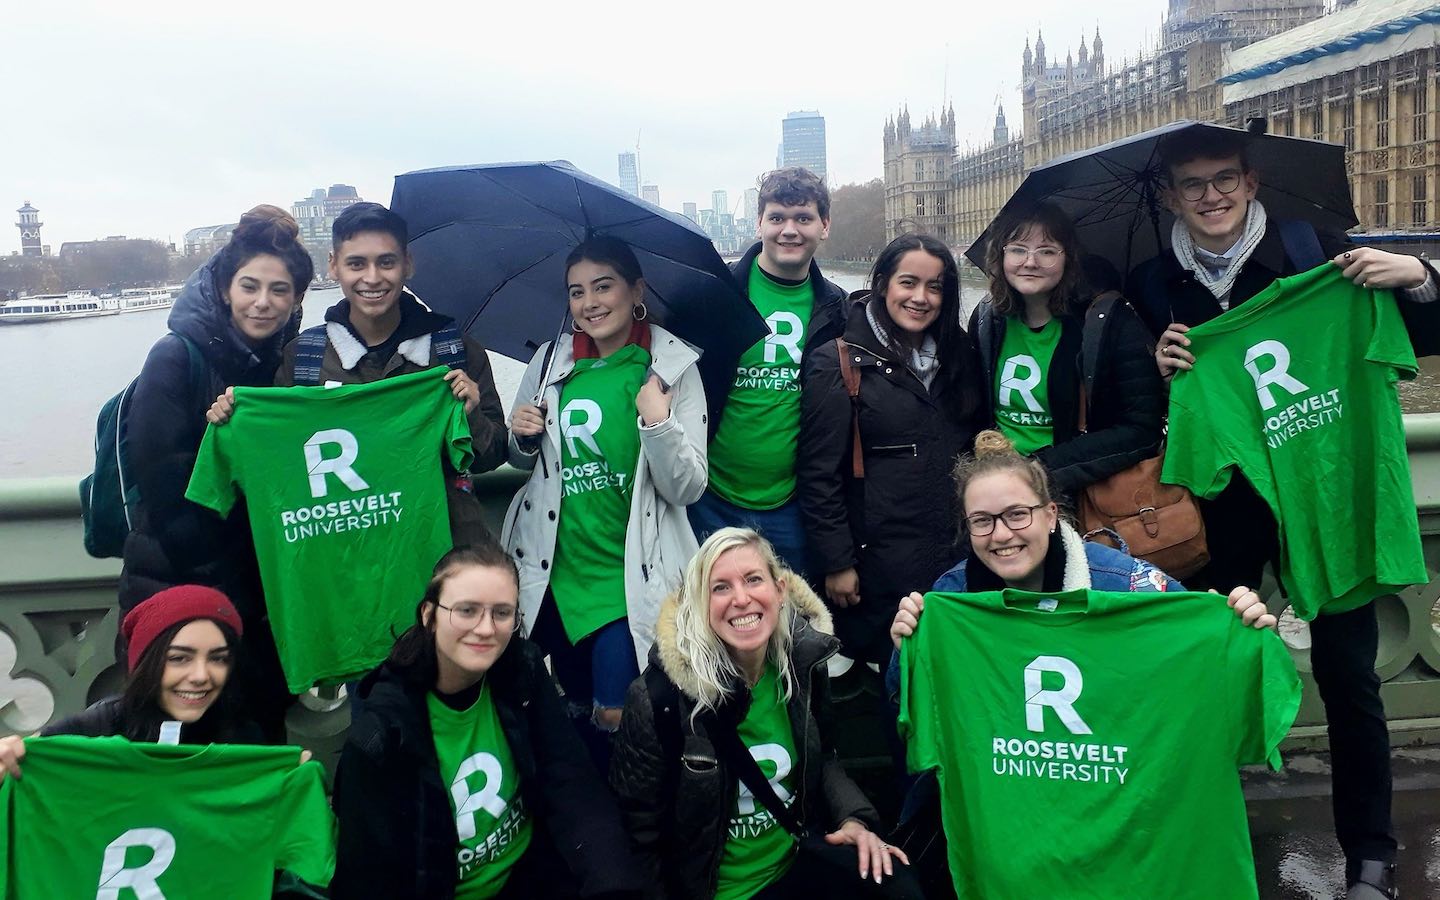 Ten students holding green Roosevelt t-shirts in front of the Palace of Westminster.